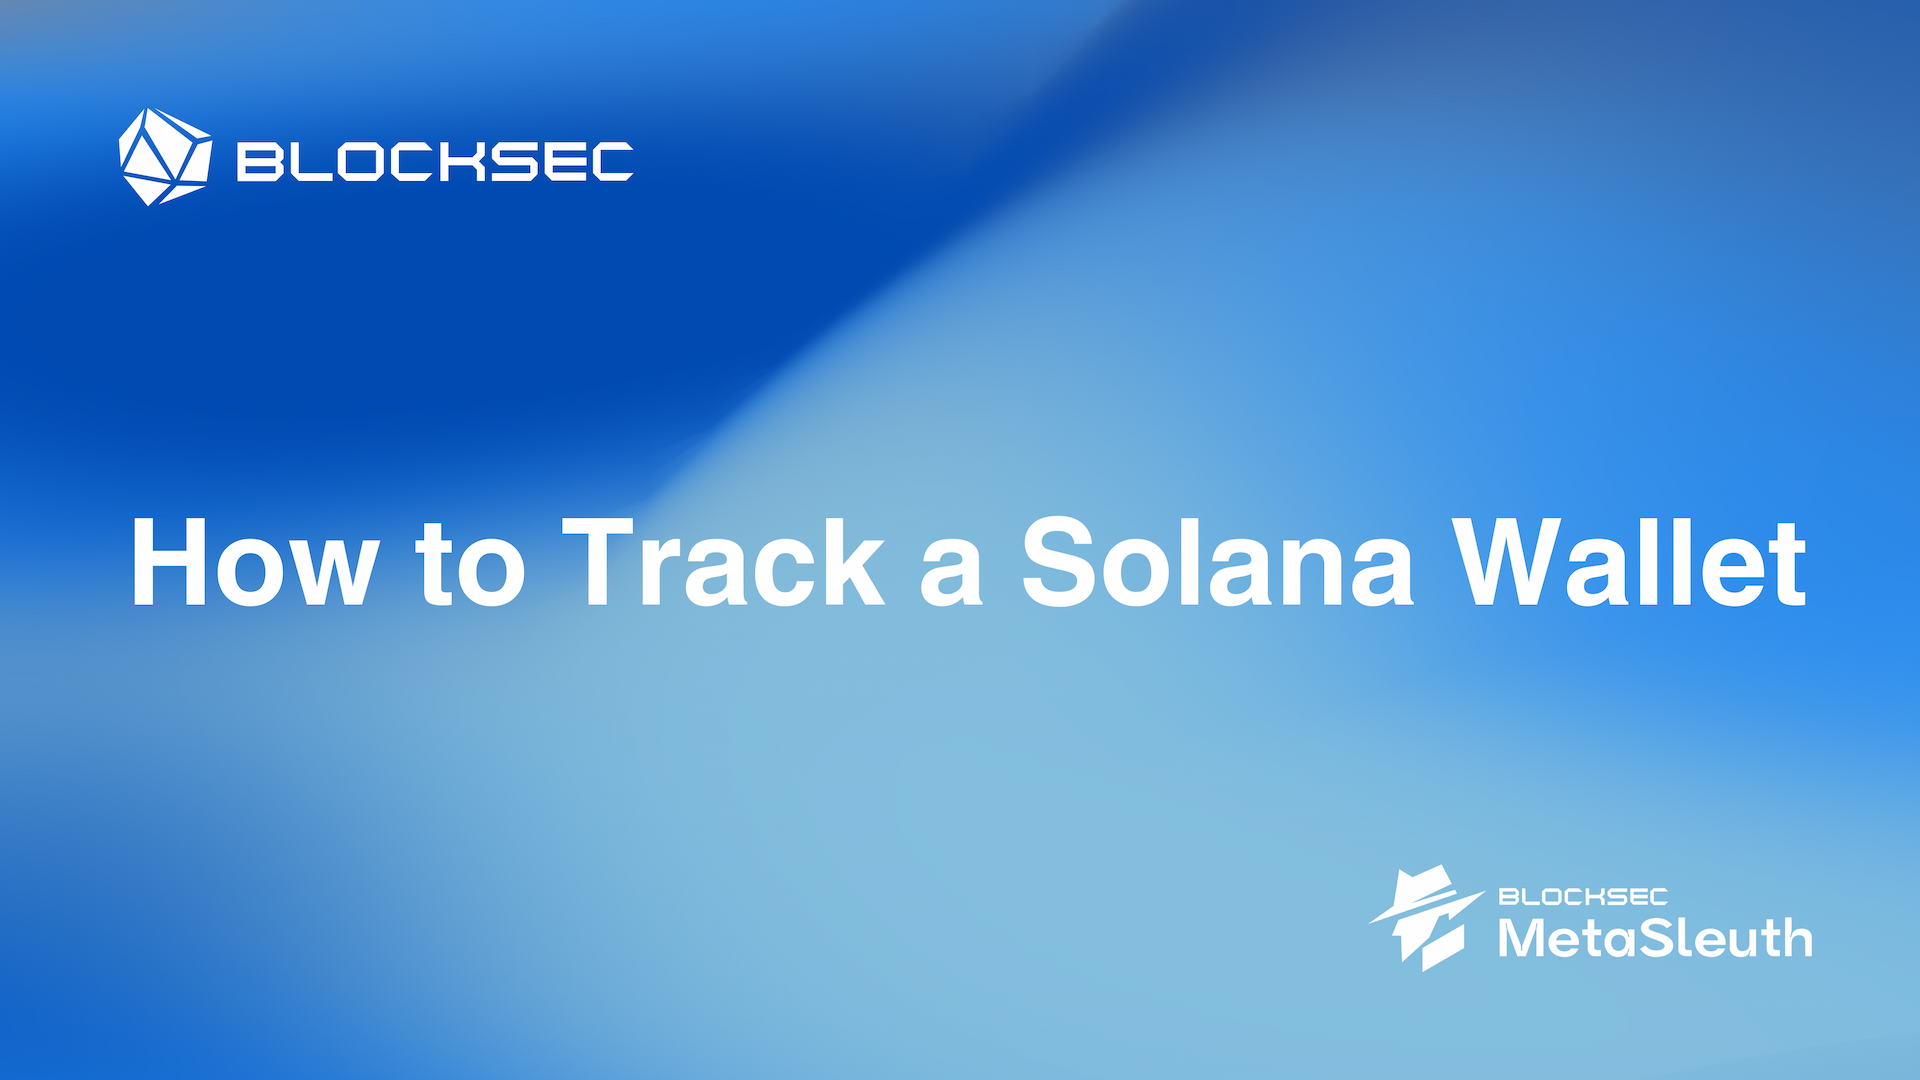 How to Track a Solana Wallet